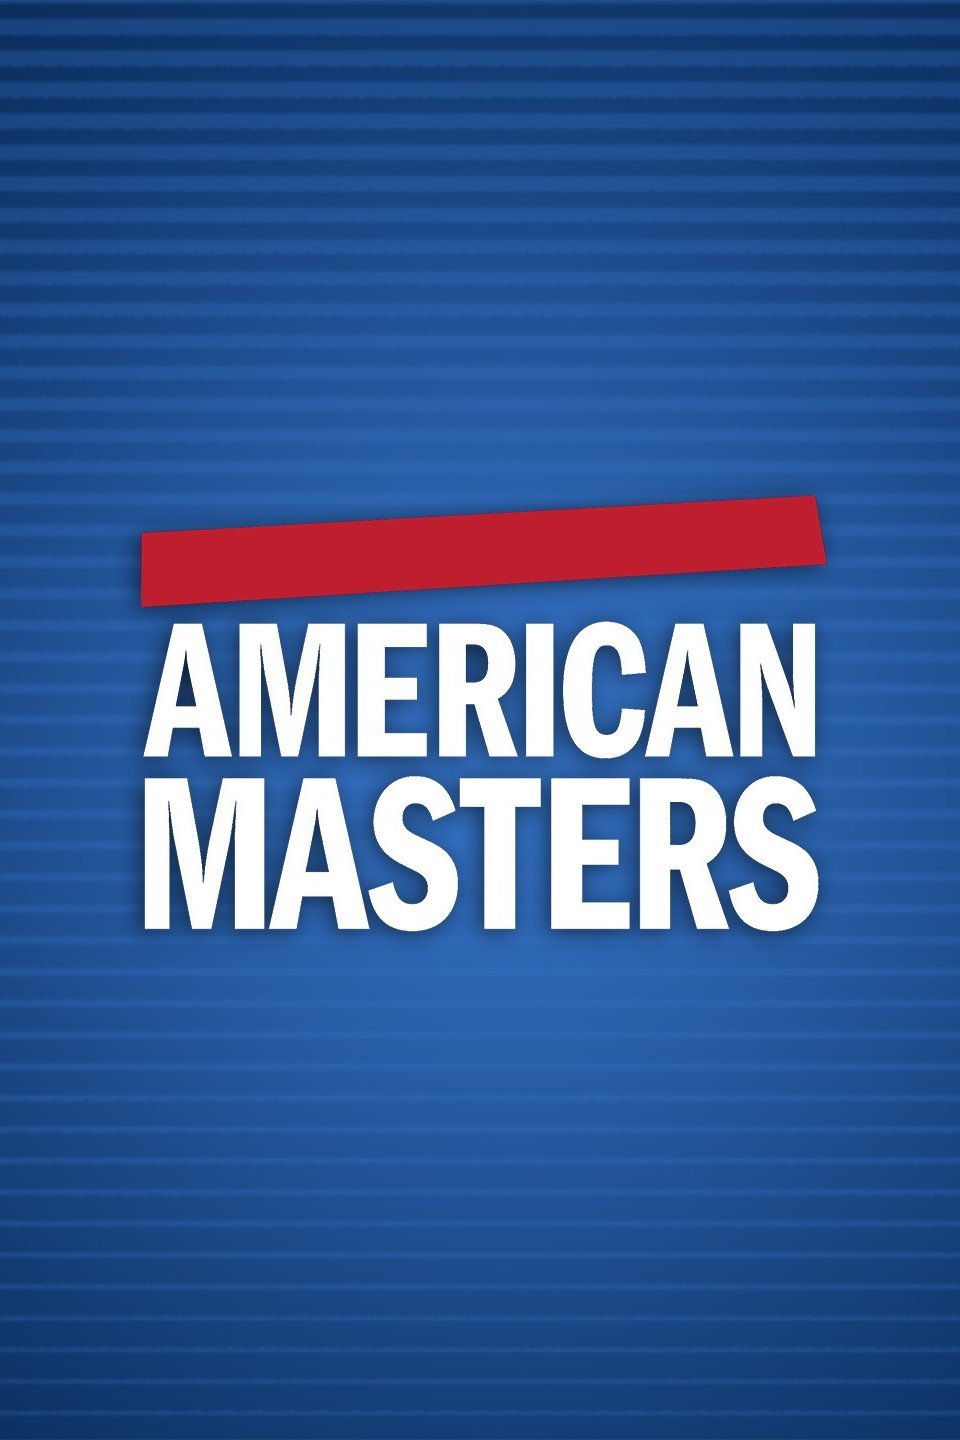 Is “American Masters Joe Papp in Five Acts” on PBS